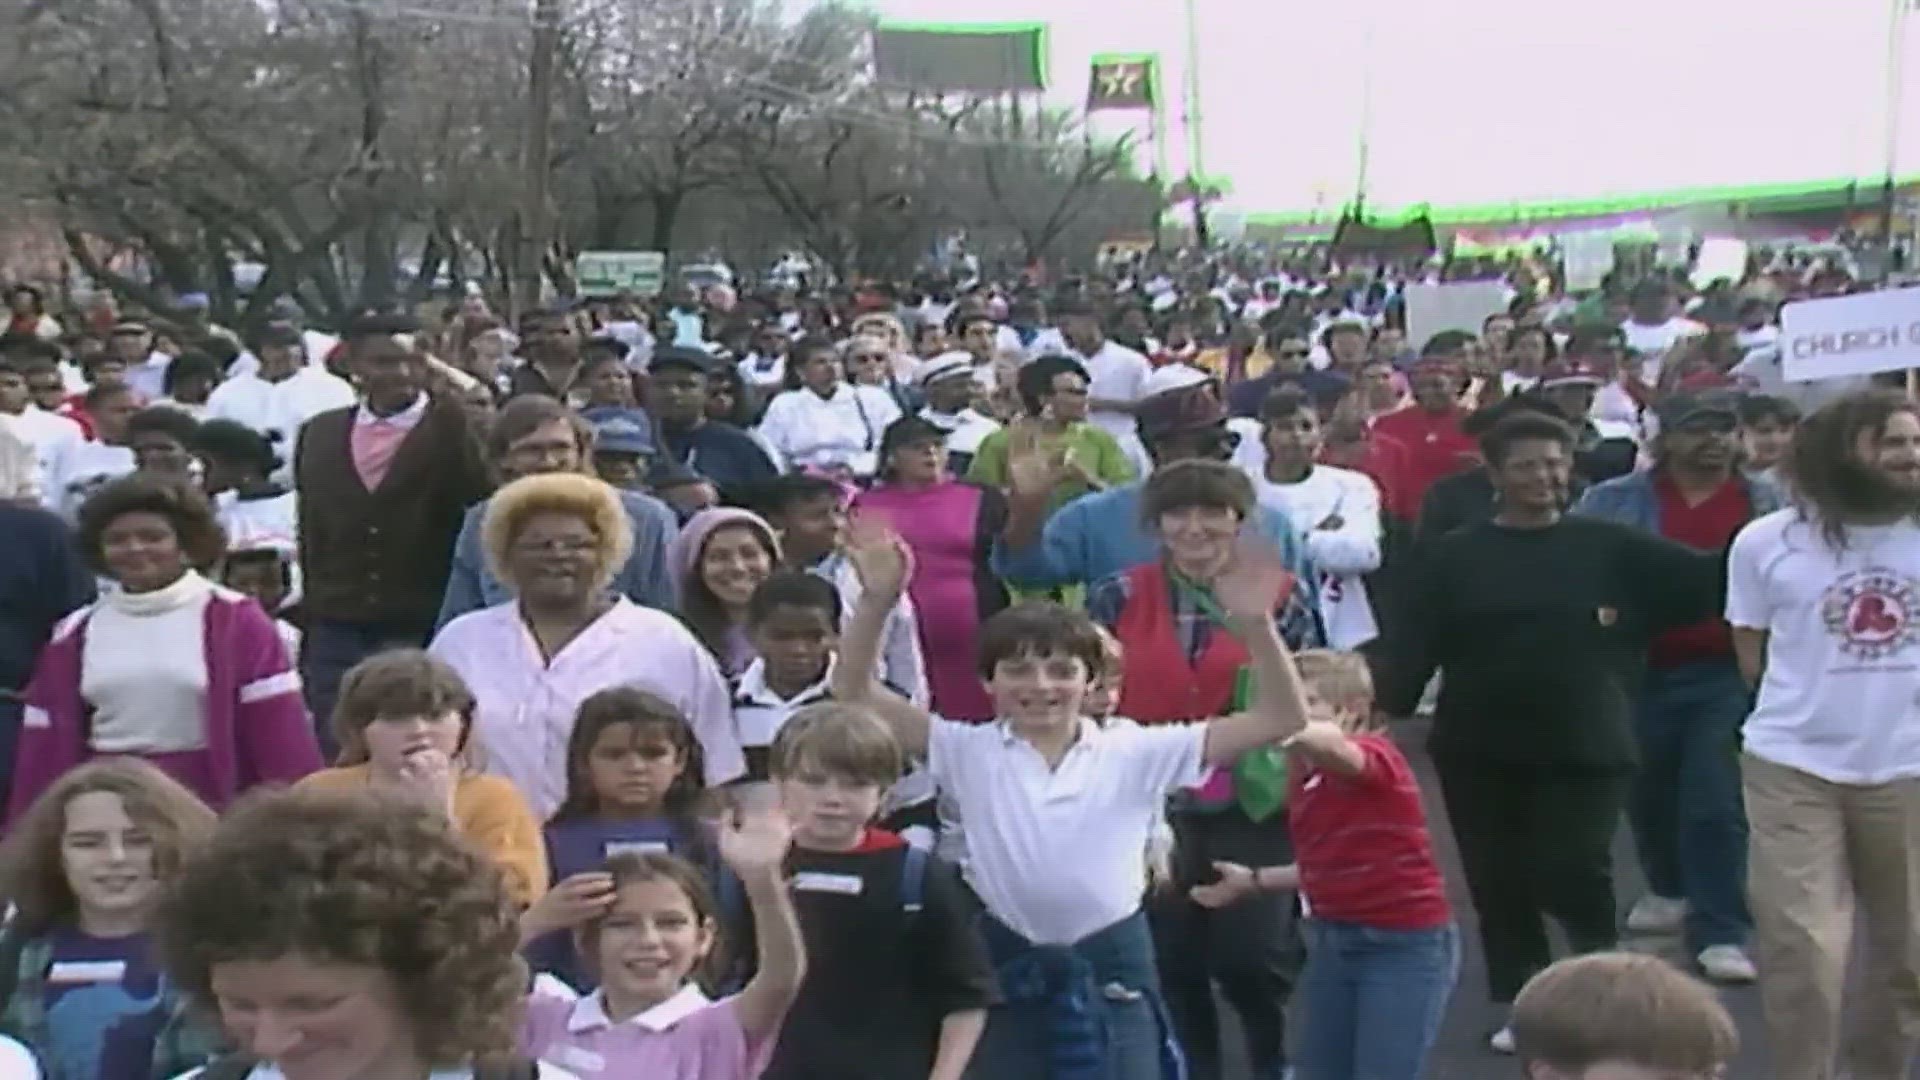 This year marks the 37th annual San Antonio MLK March